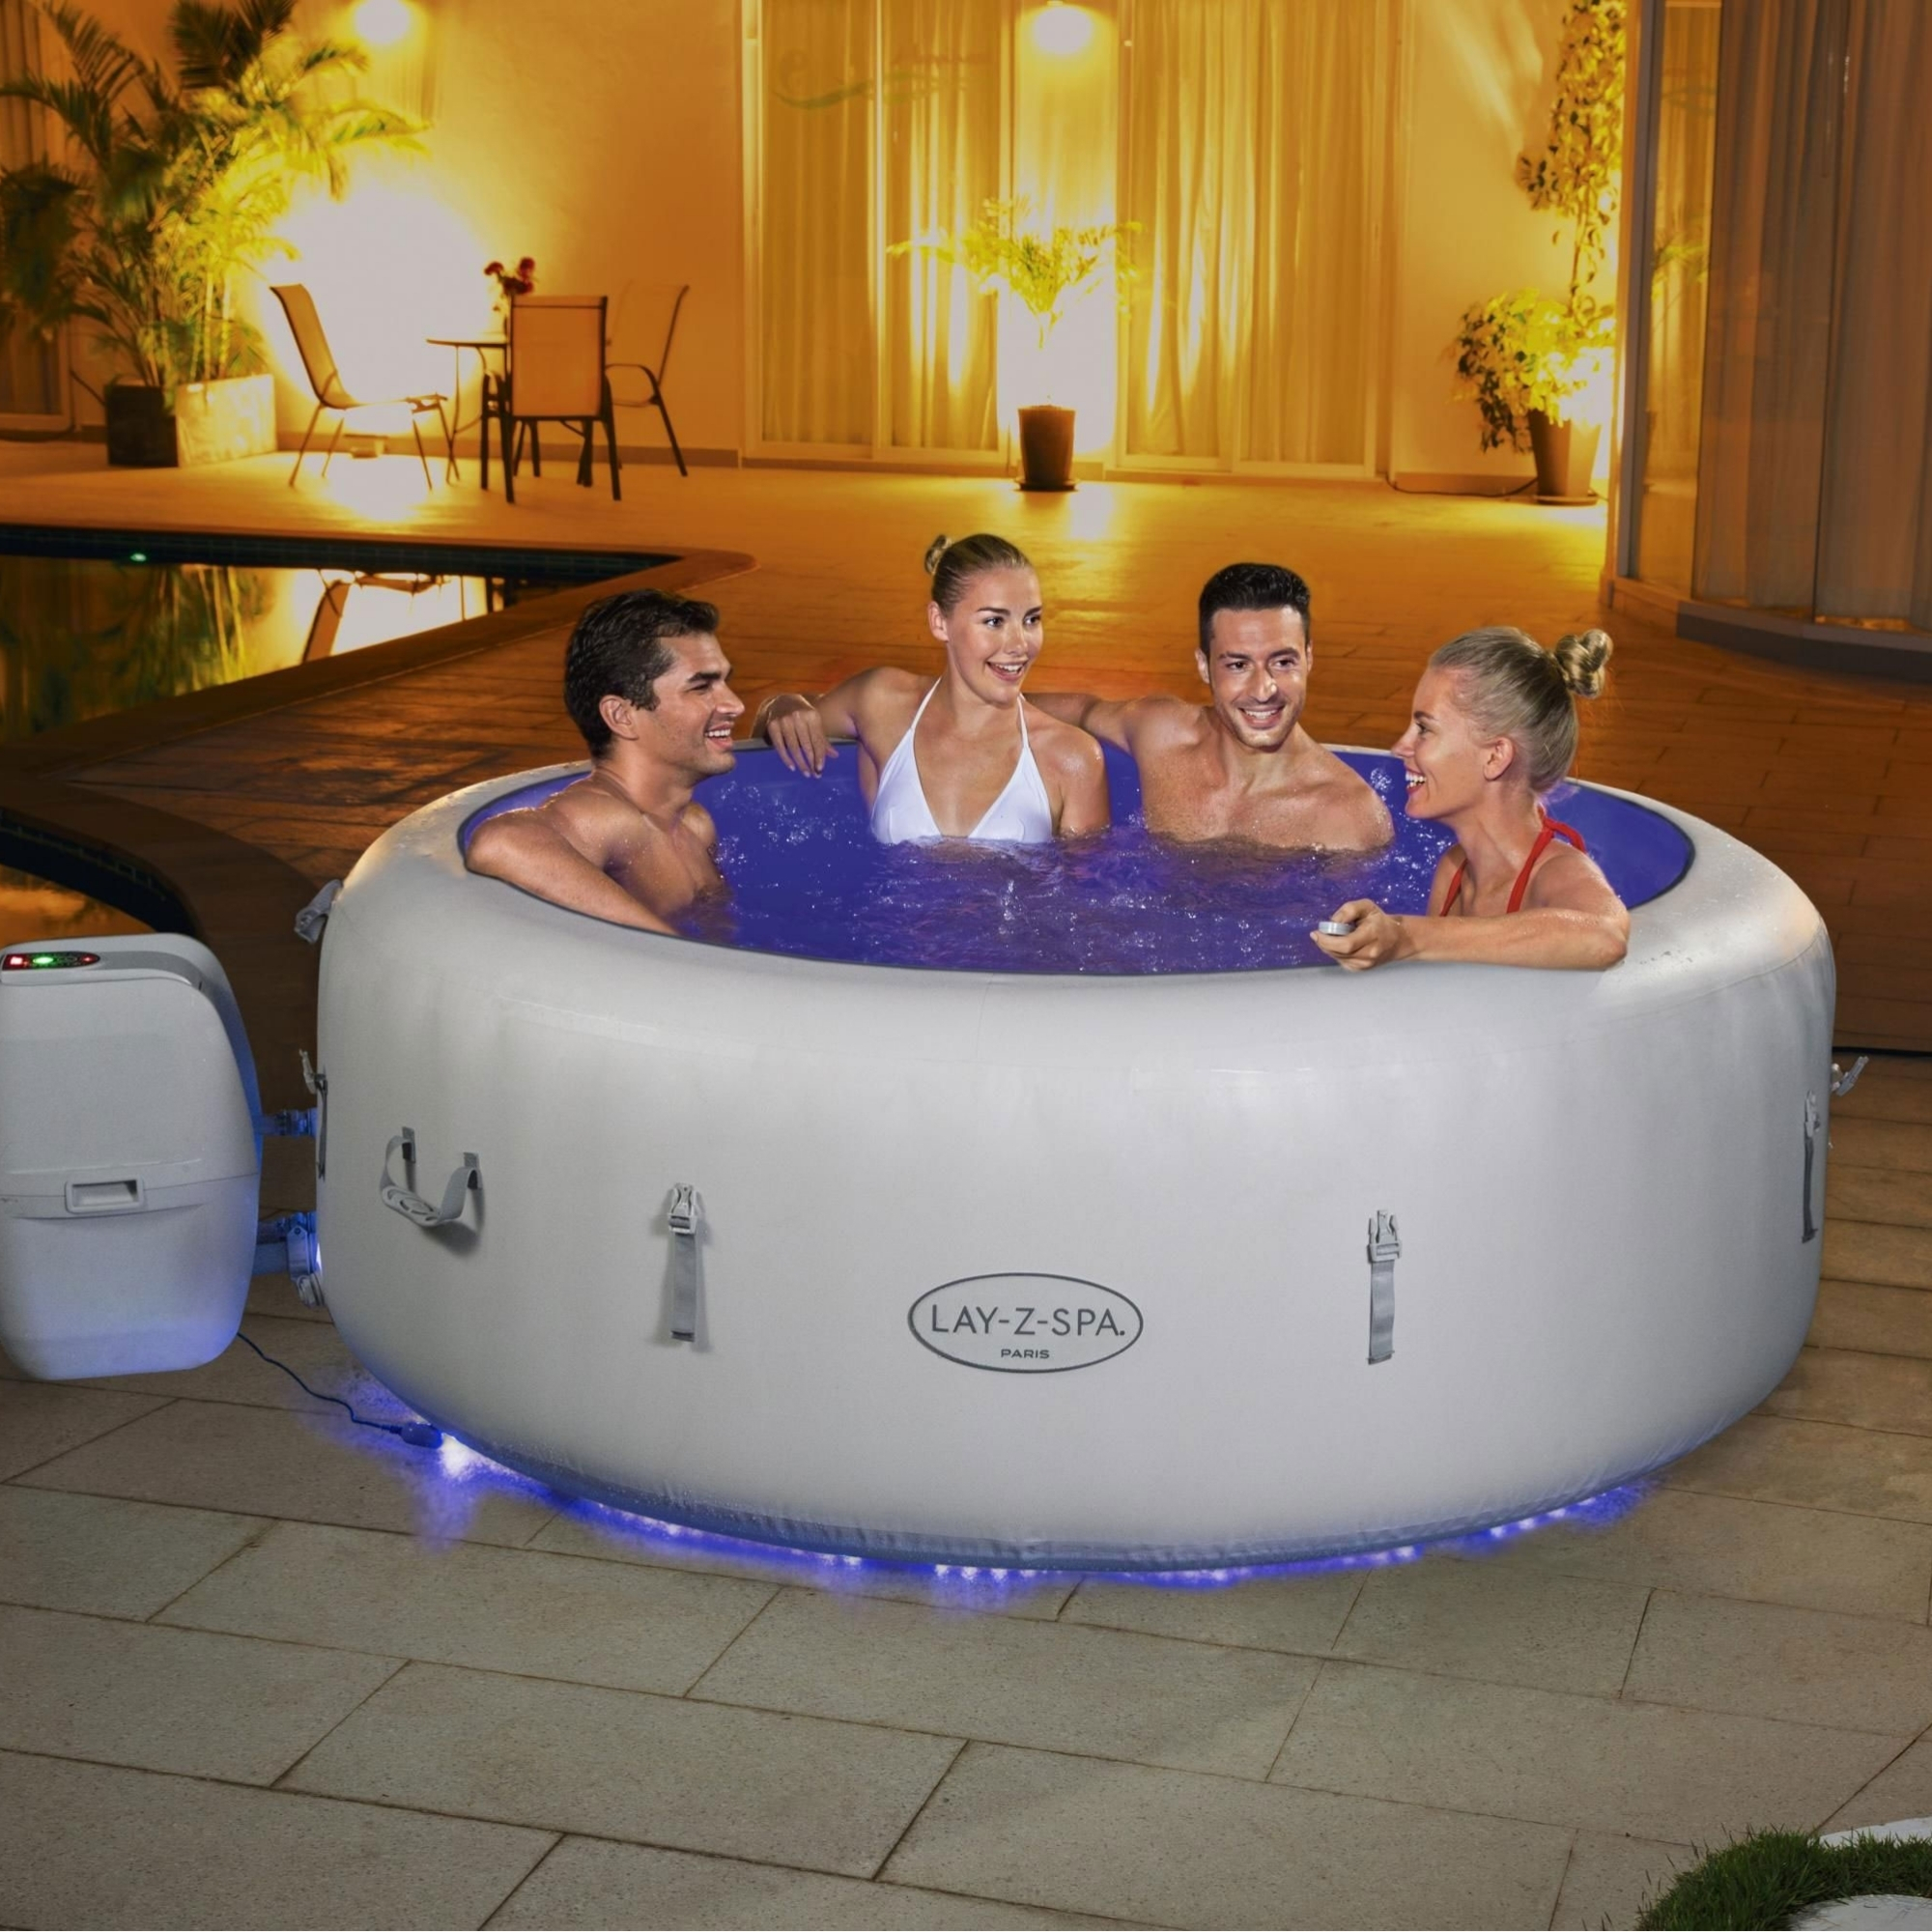 Lay Z Spa Paris Airjet Inflatable Hot Tub at Drinkstuff